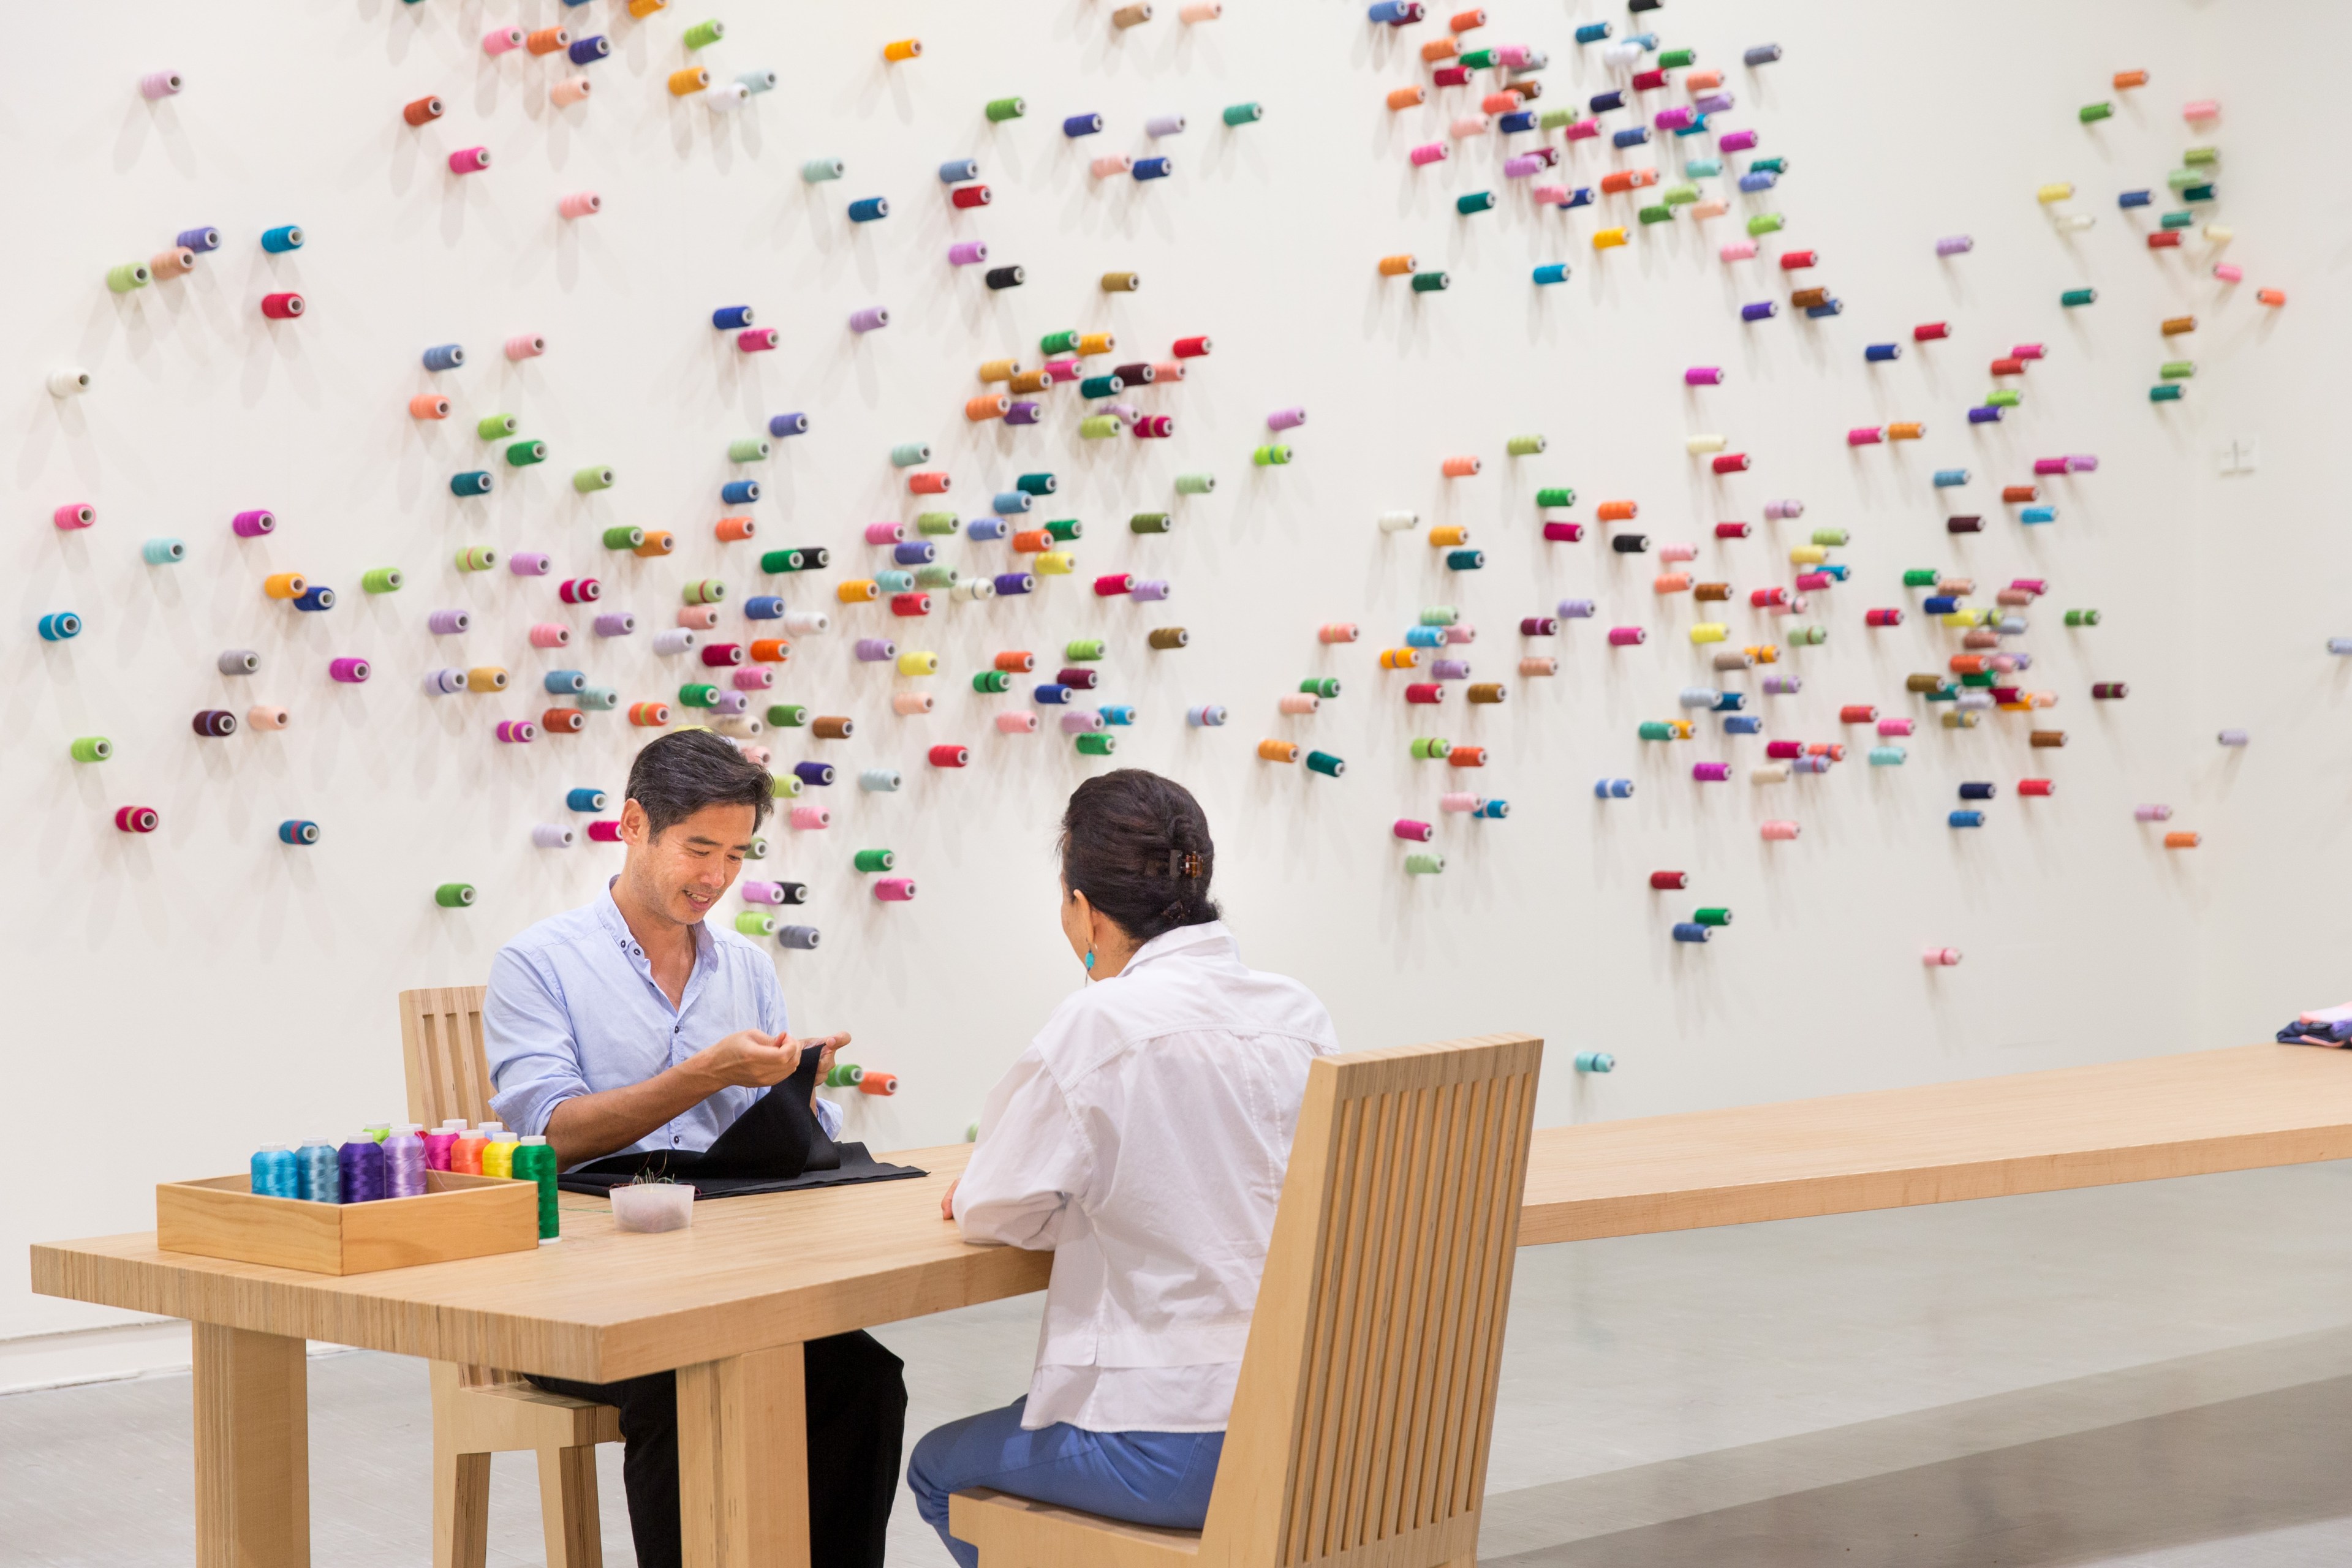 Two people sit at a table in an art gallery with colorful spools on the wall behind them.